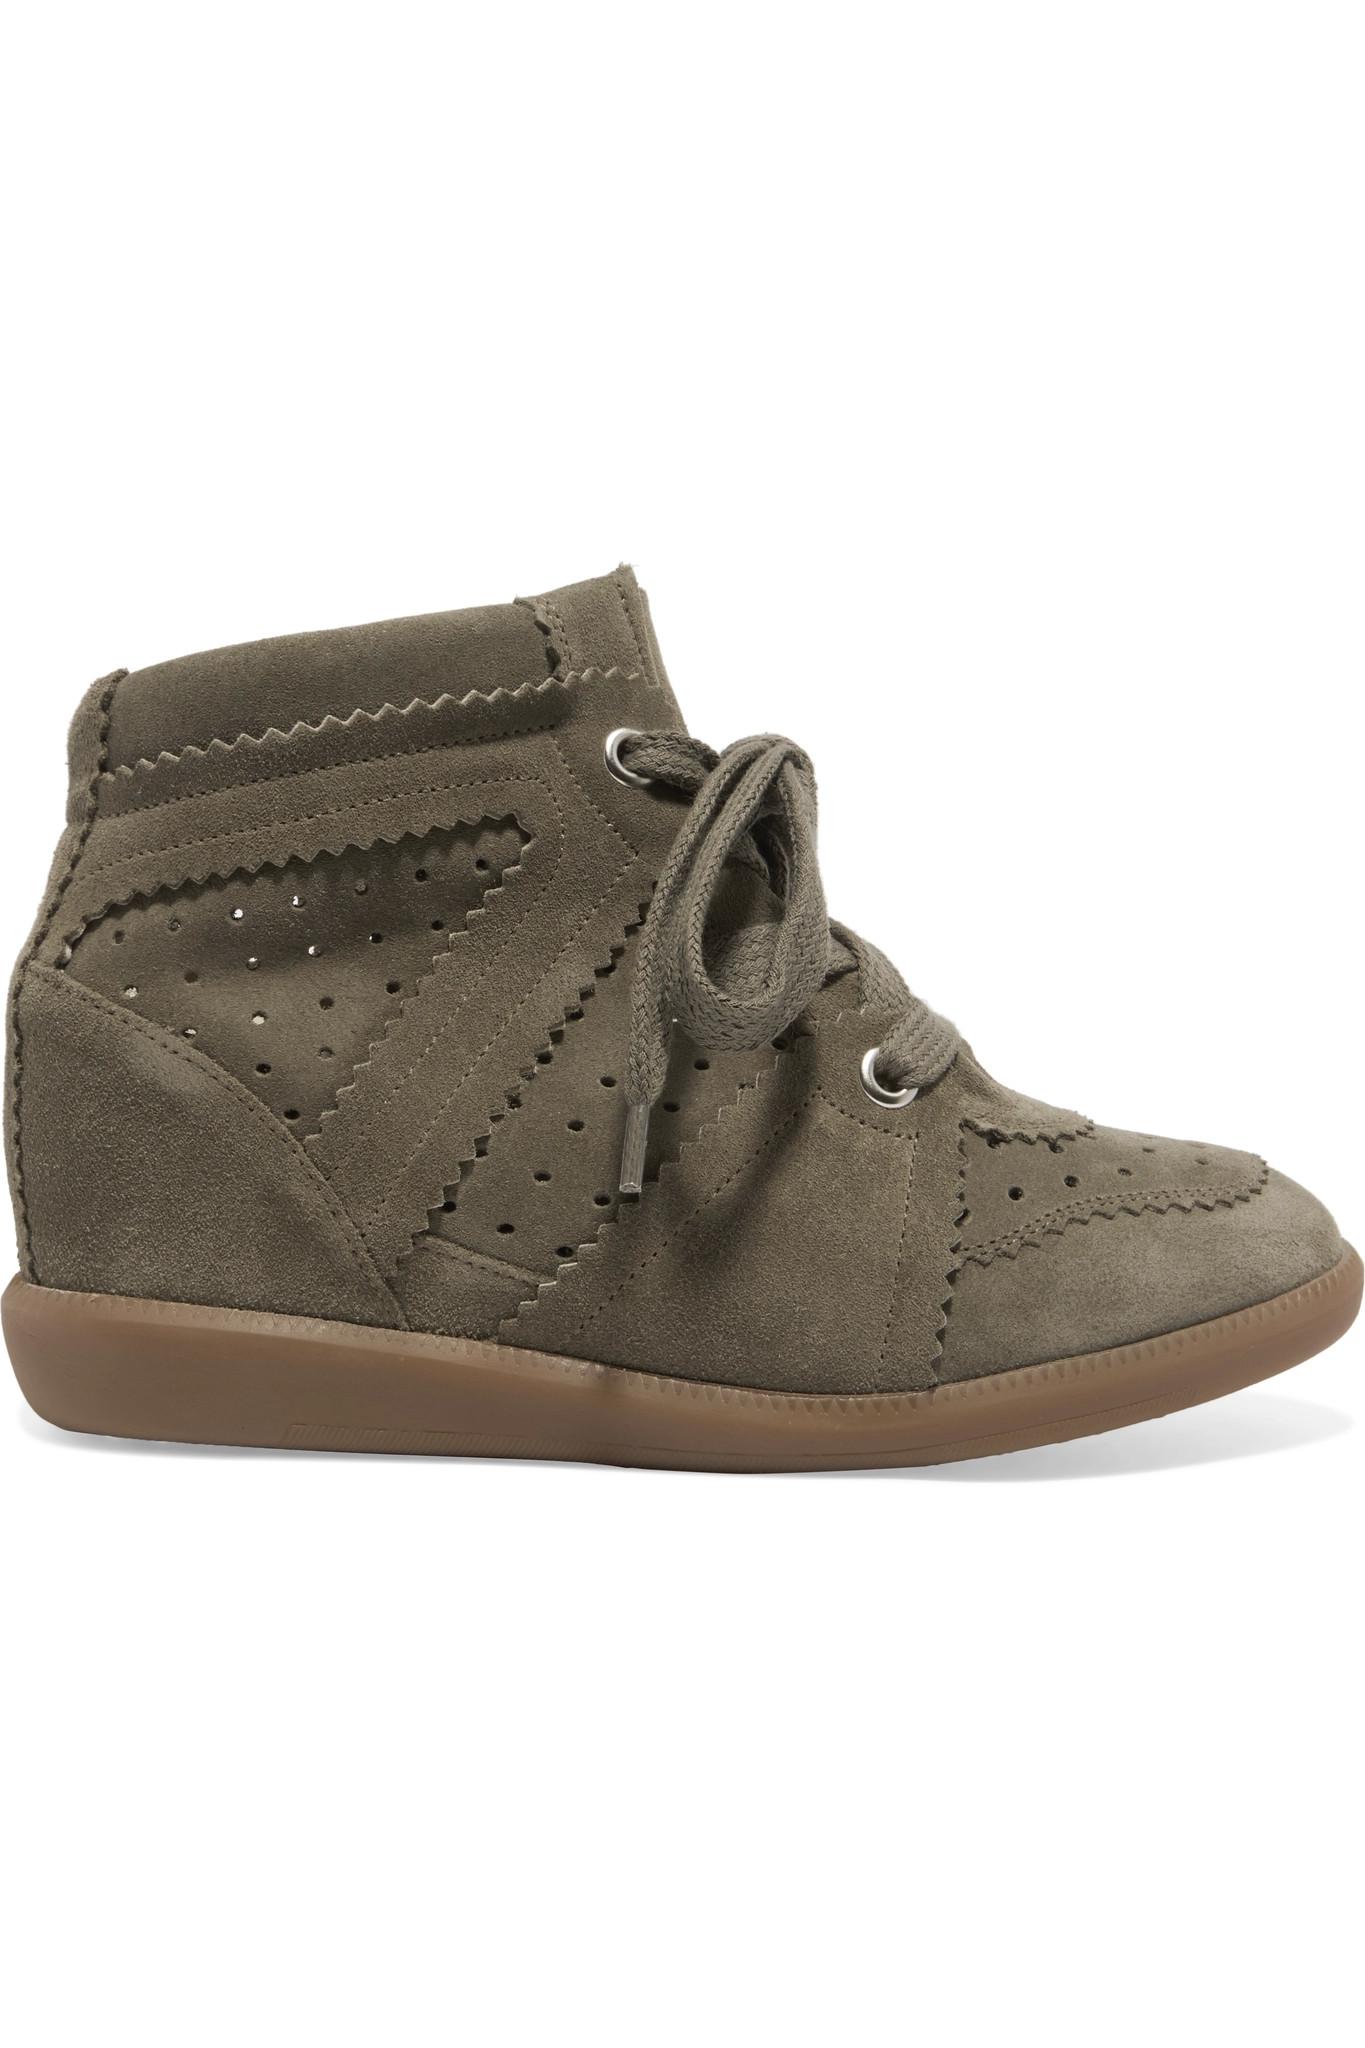 army green wedge sneakers